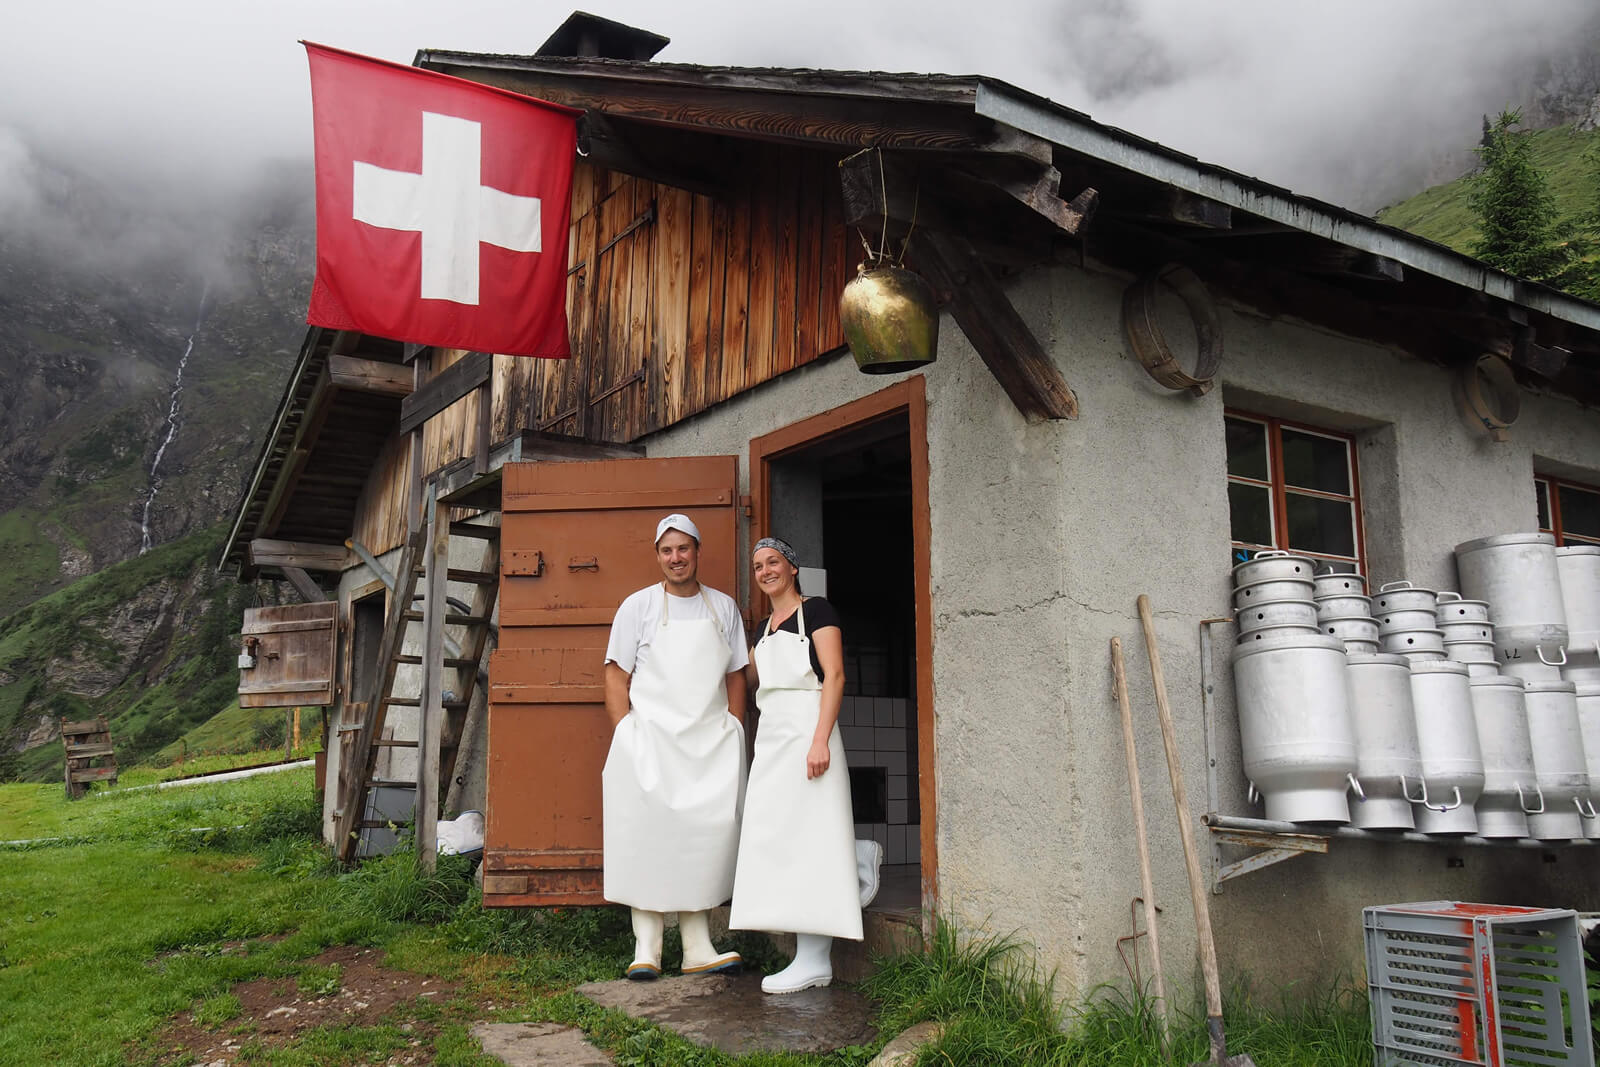 Inside Swissness: 17 Images Of The Iconic Swiss Cross